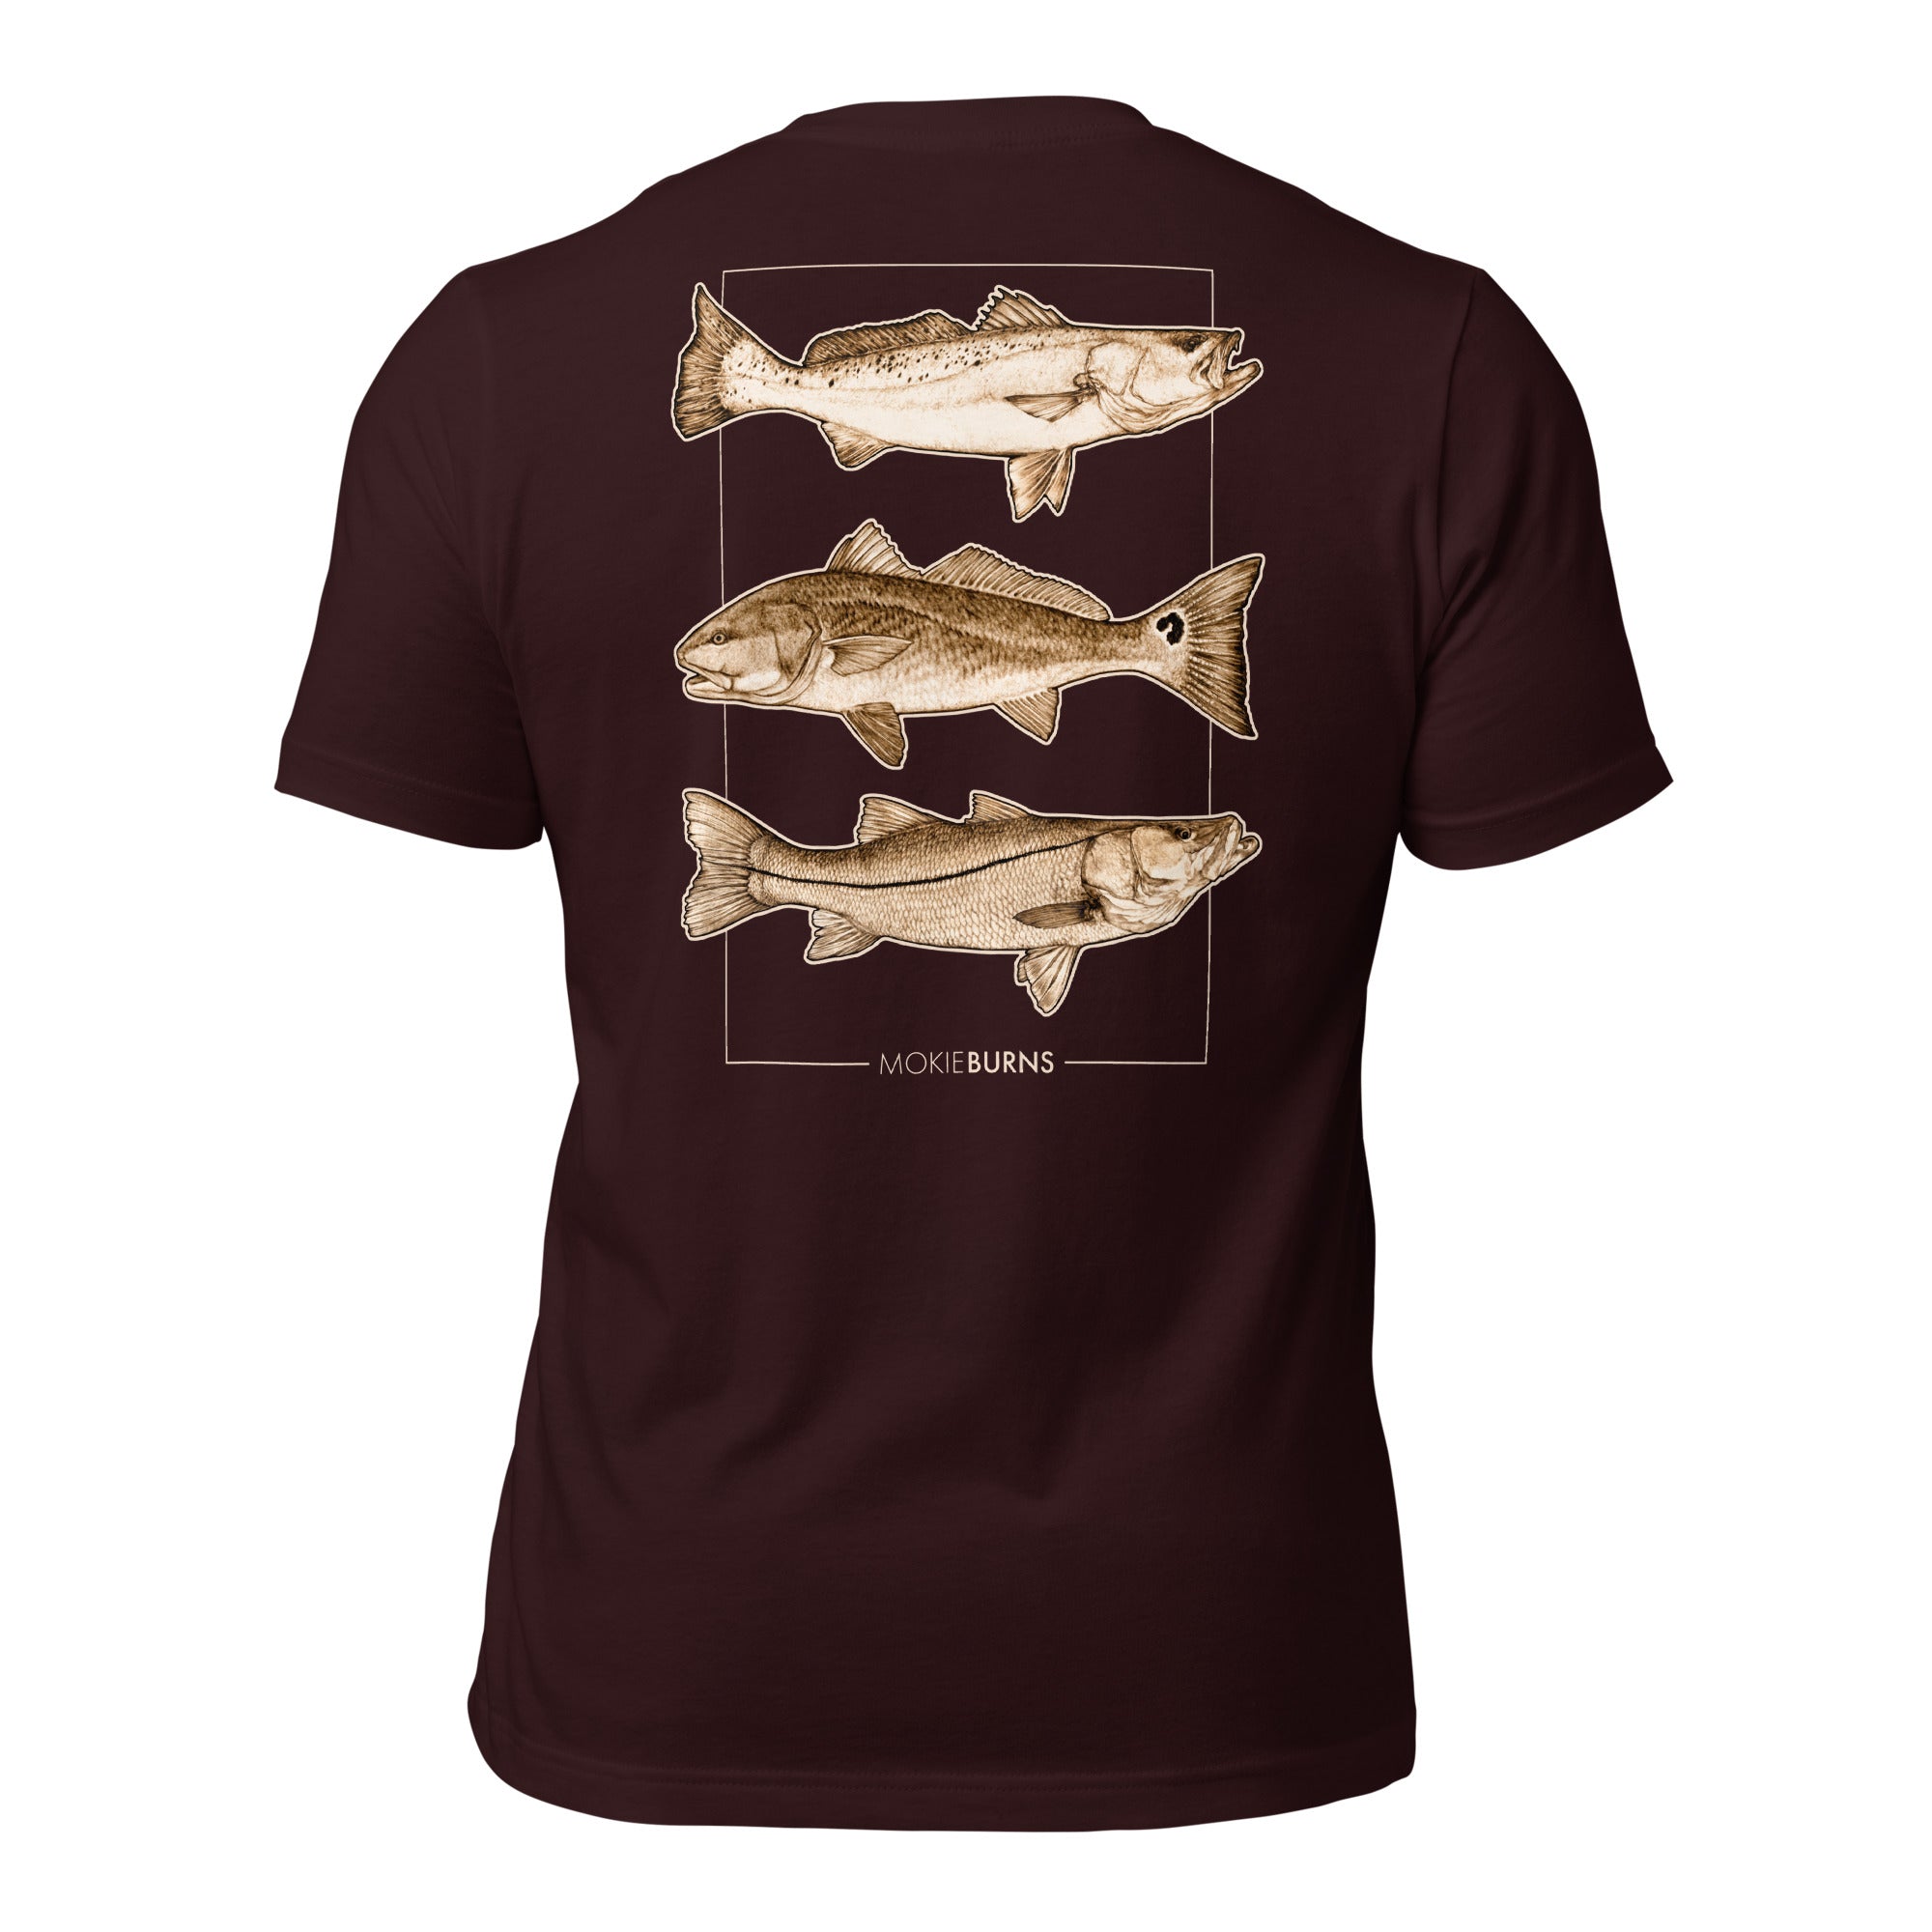 Inshore Slam [Seatrout, Redfish and Snook] - Soft Cotton T-Shirt for Him or Her